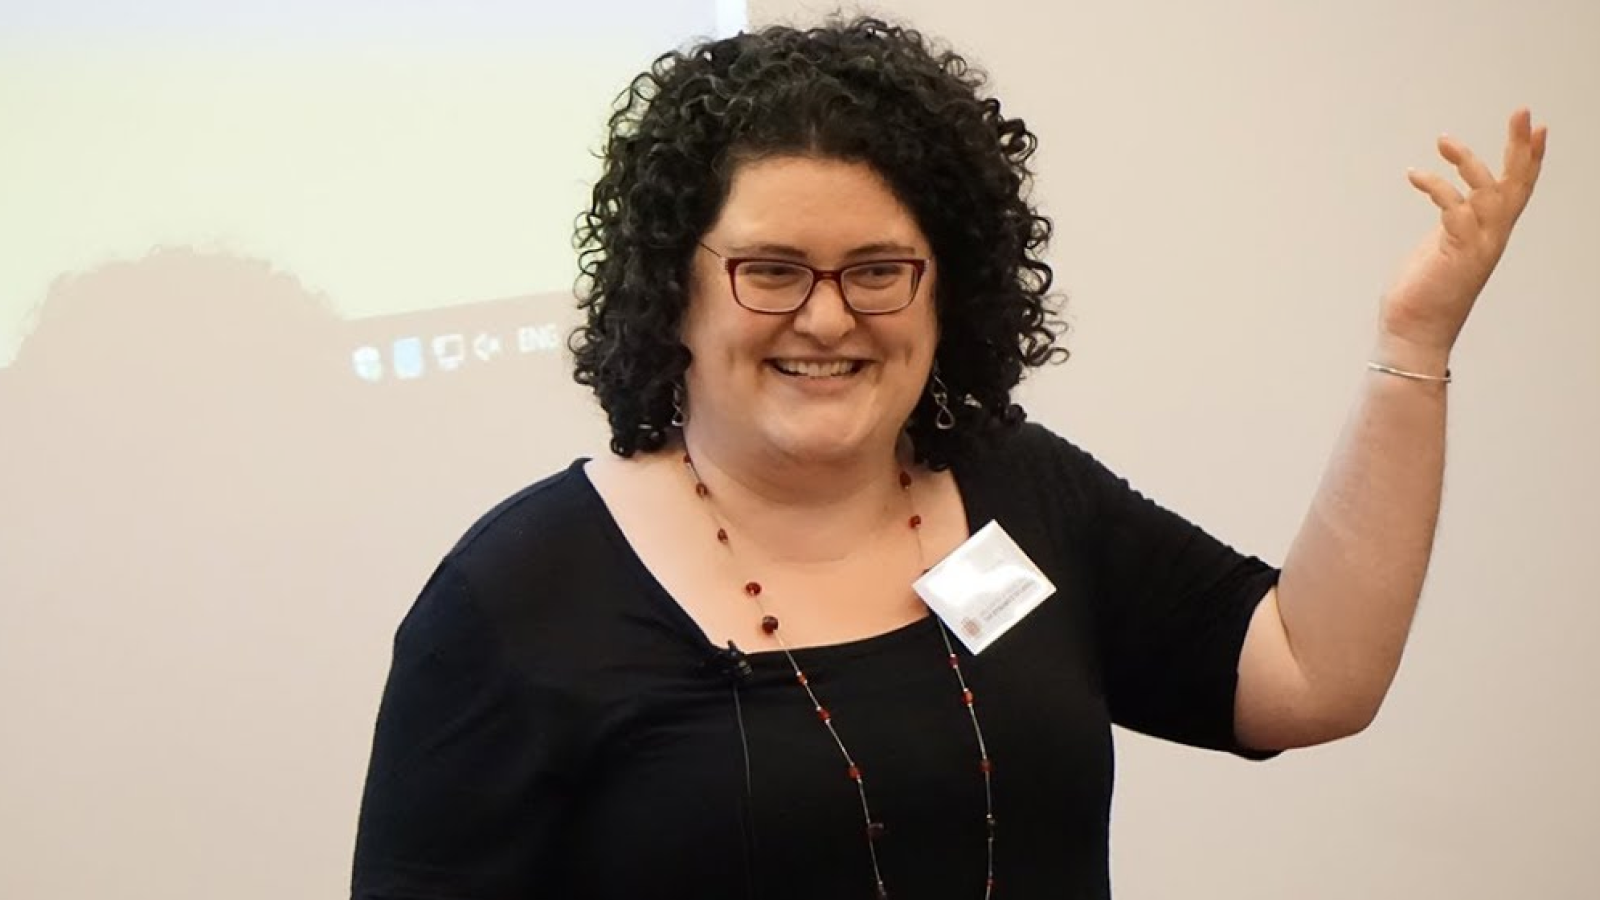 Gretchen presenting at the ARC Centre of Excellence for the Dynamics of Language. Image from Youtube.